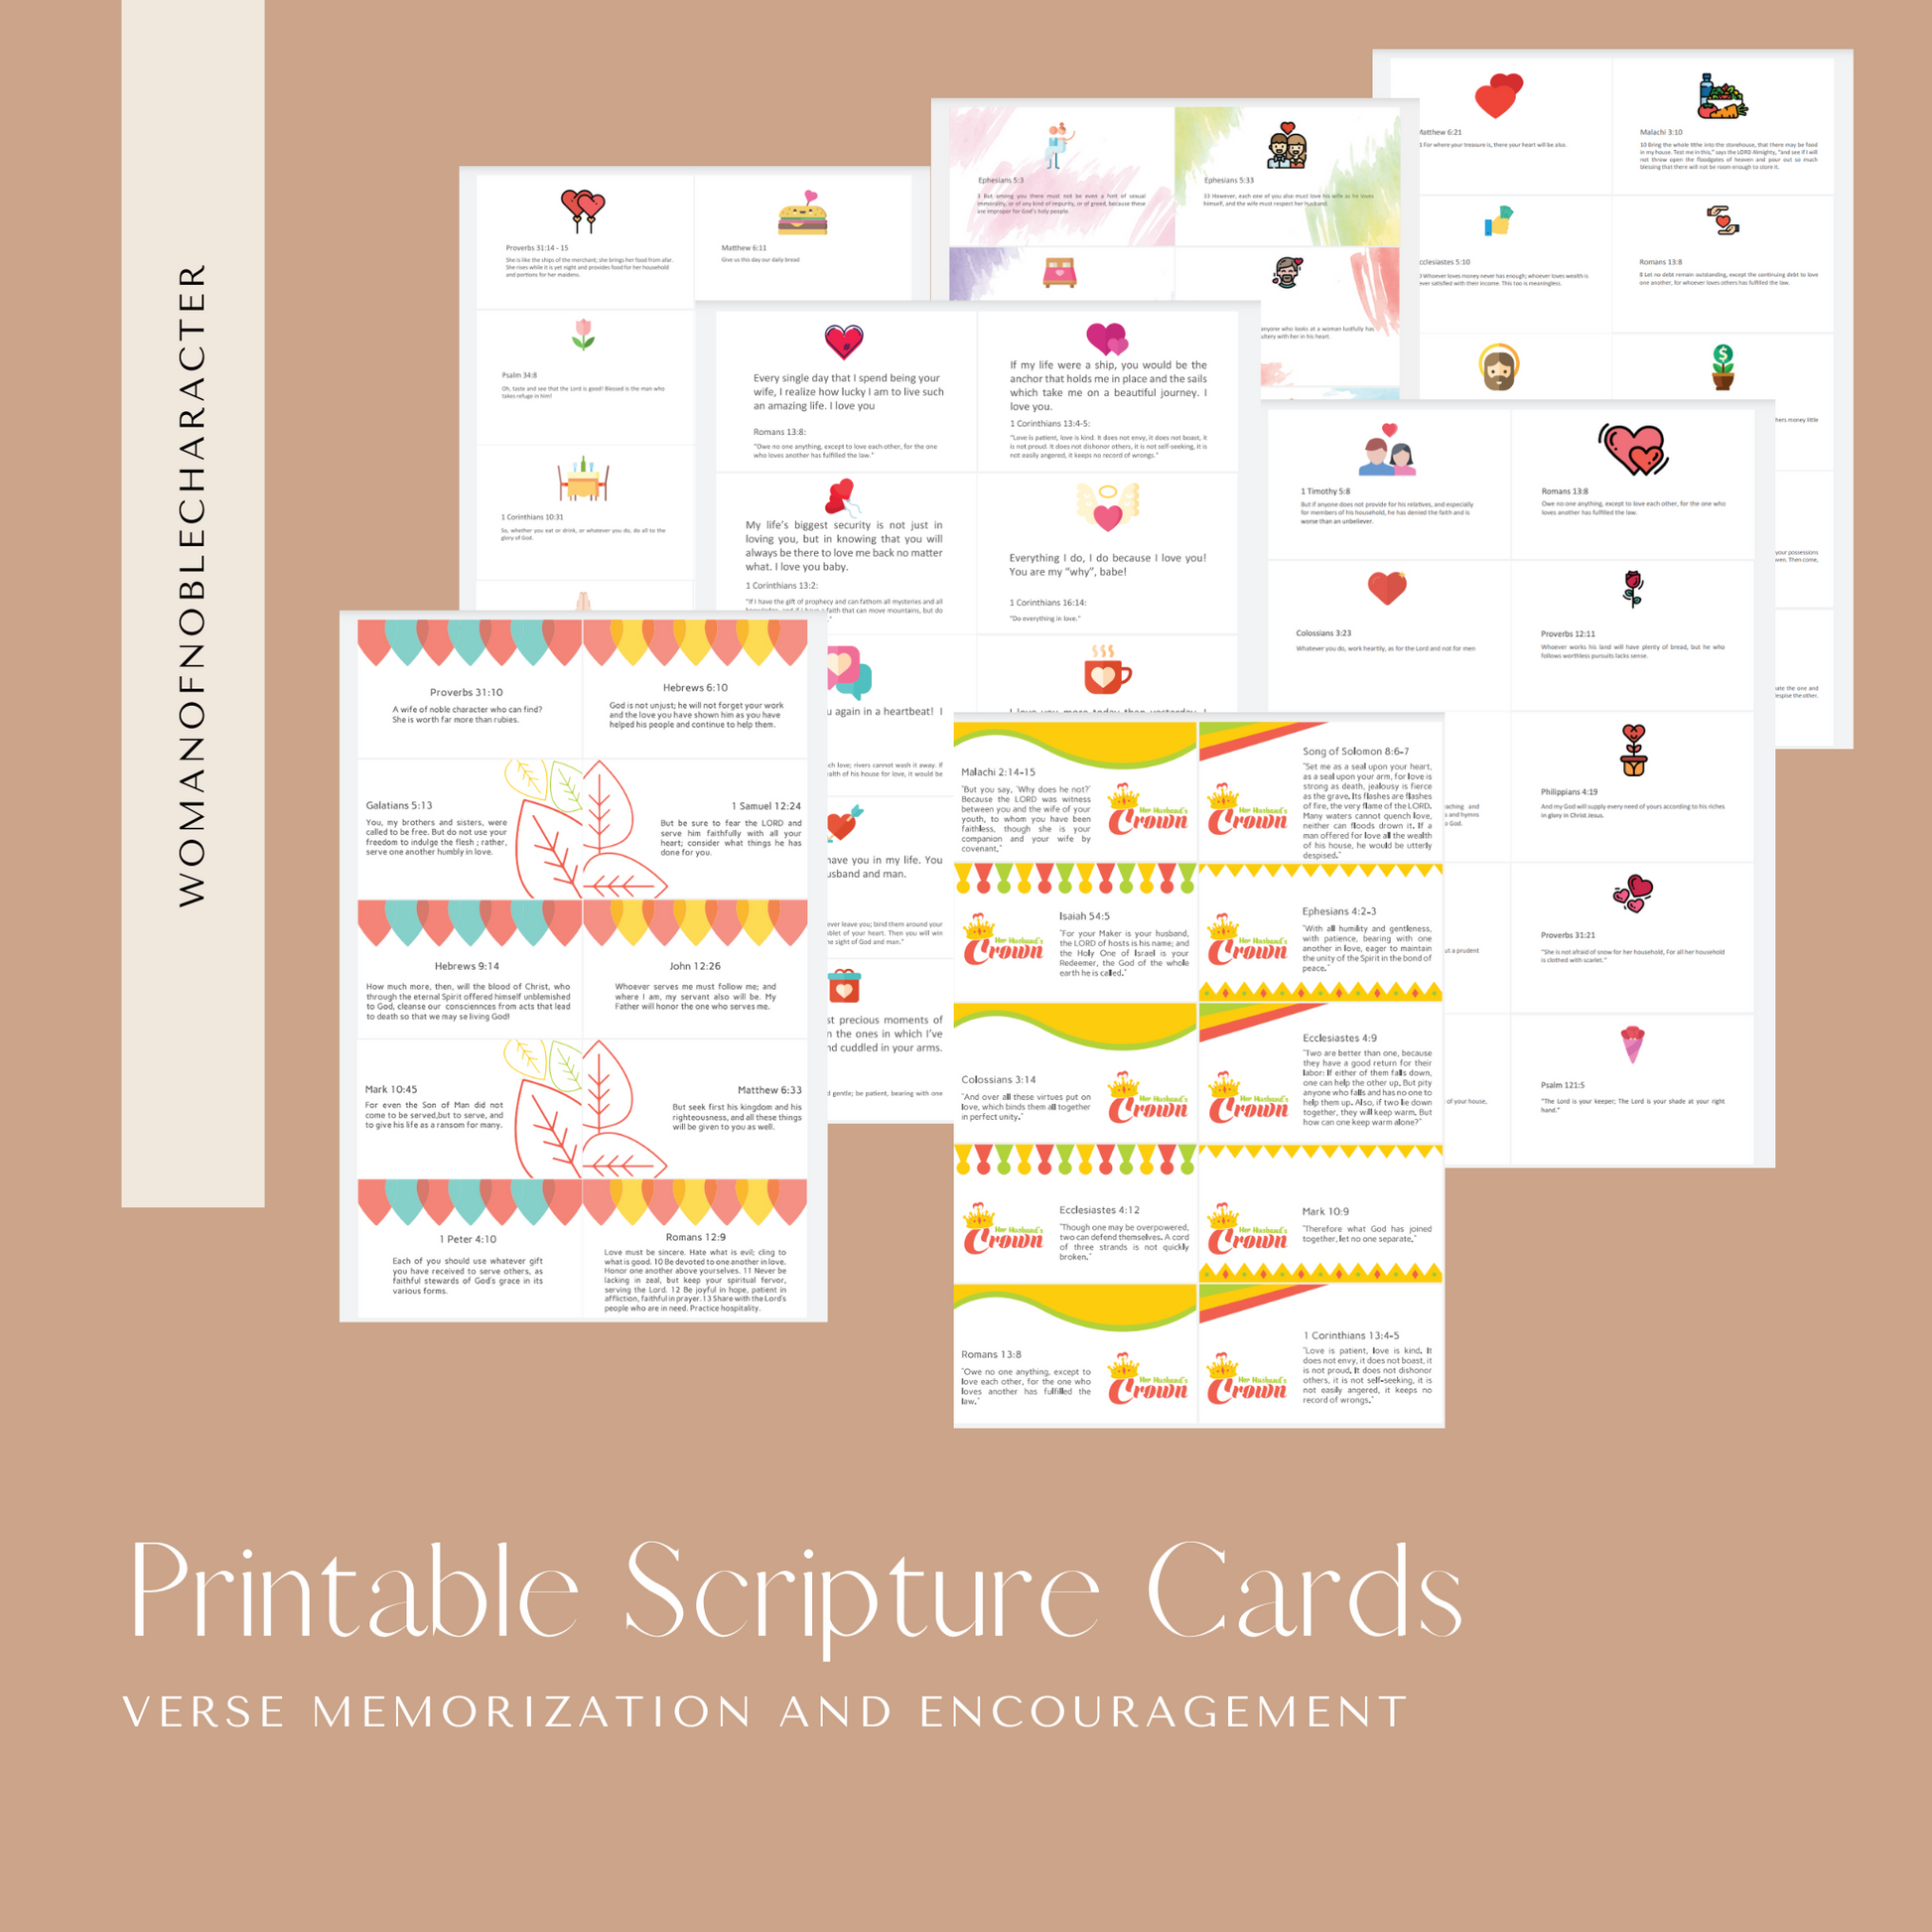 mock up of printable scripture cards for verse memorization and encouragement